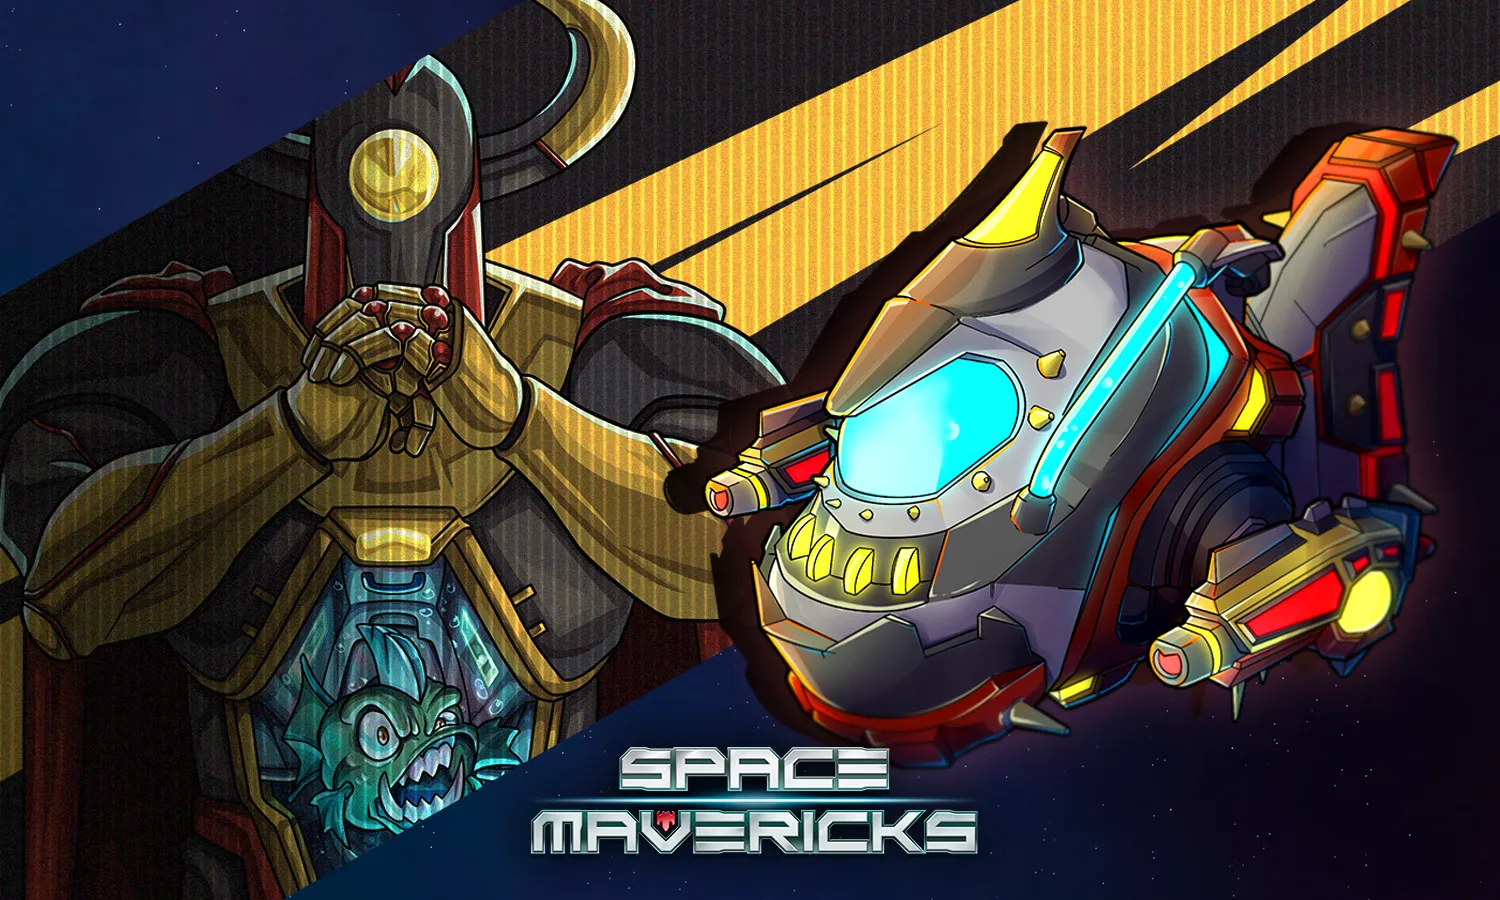 The showcased photo reveals Goliath, one of the formidable commanders in Space Mavericks, available for players to utilize and master their skills.